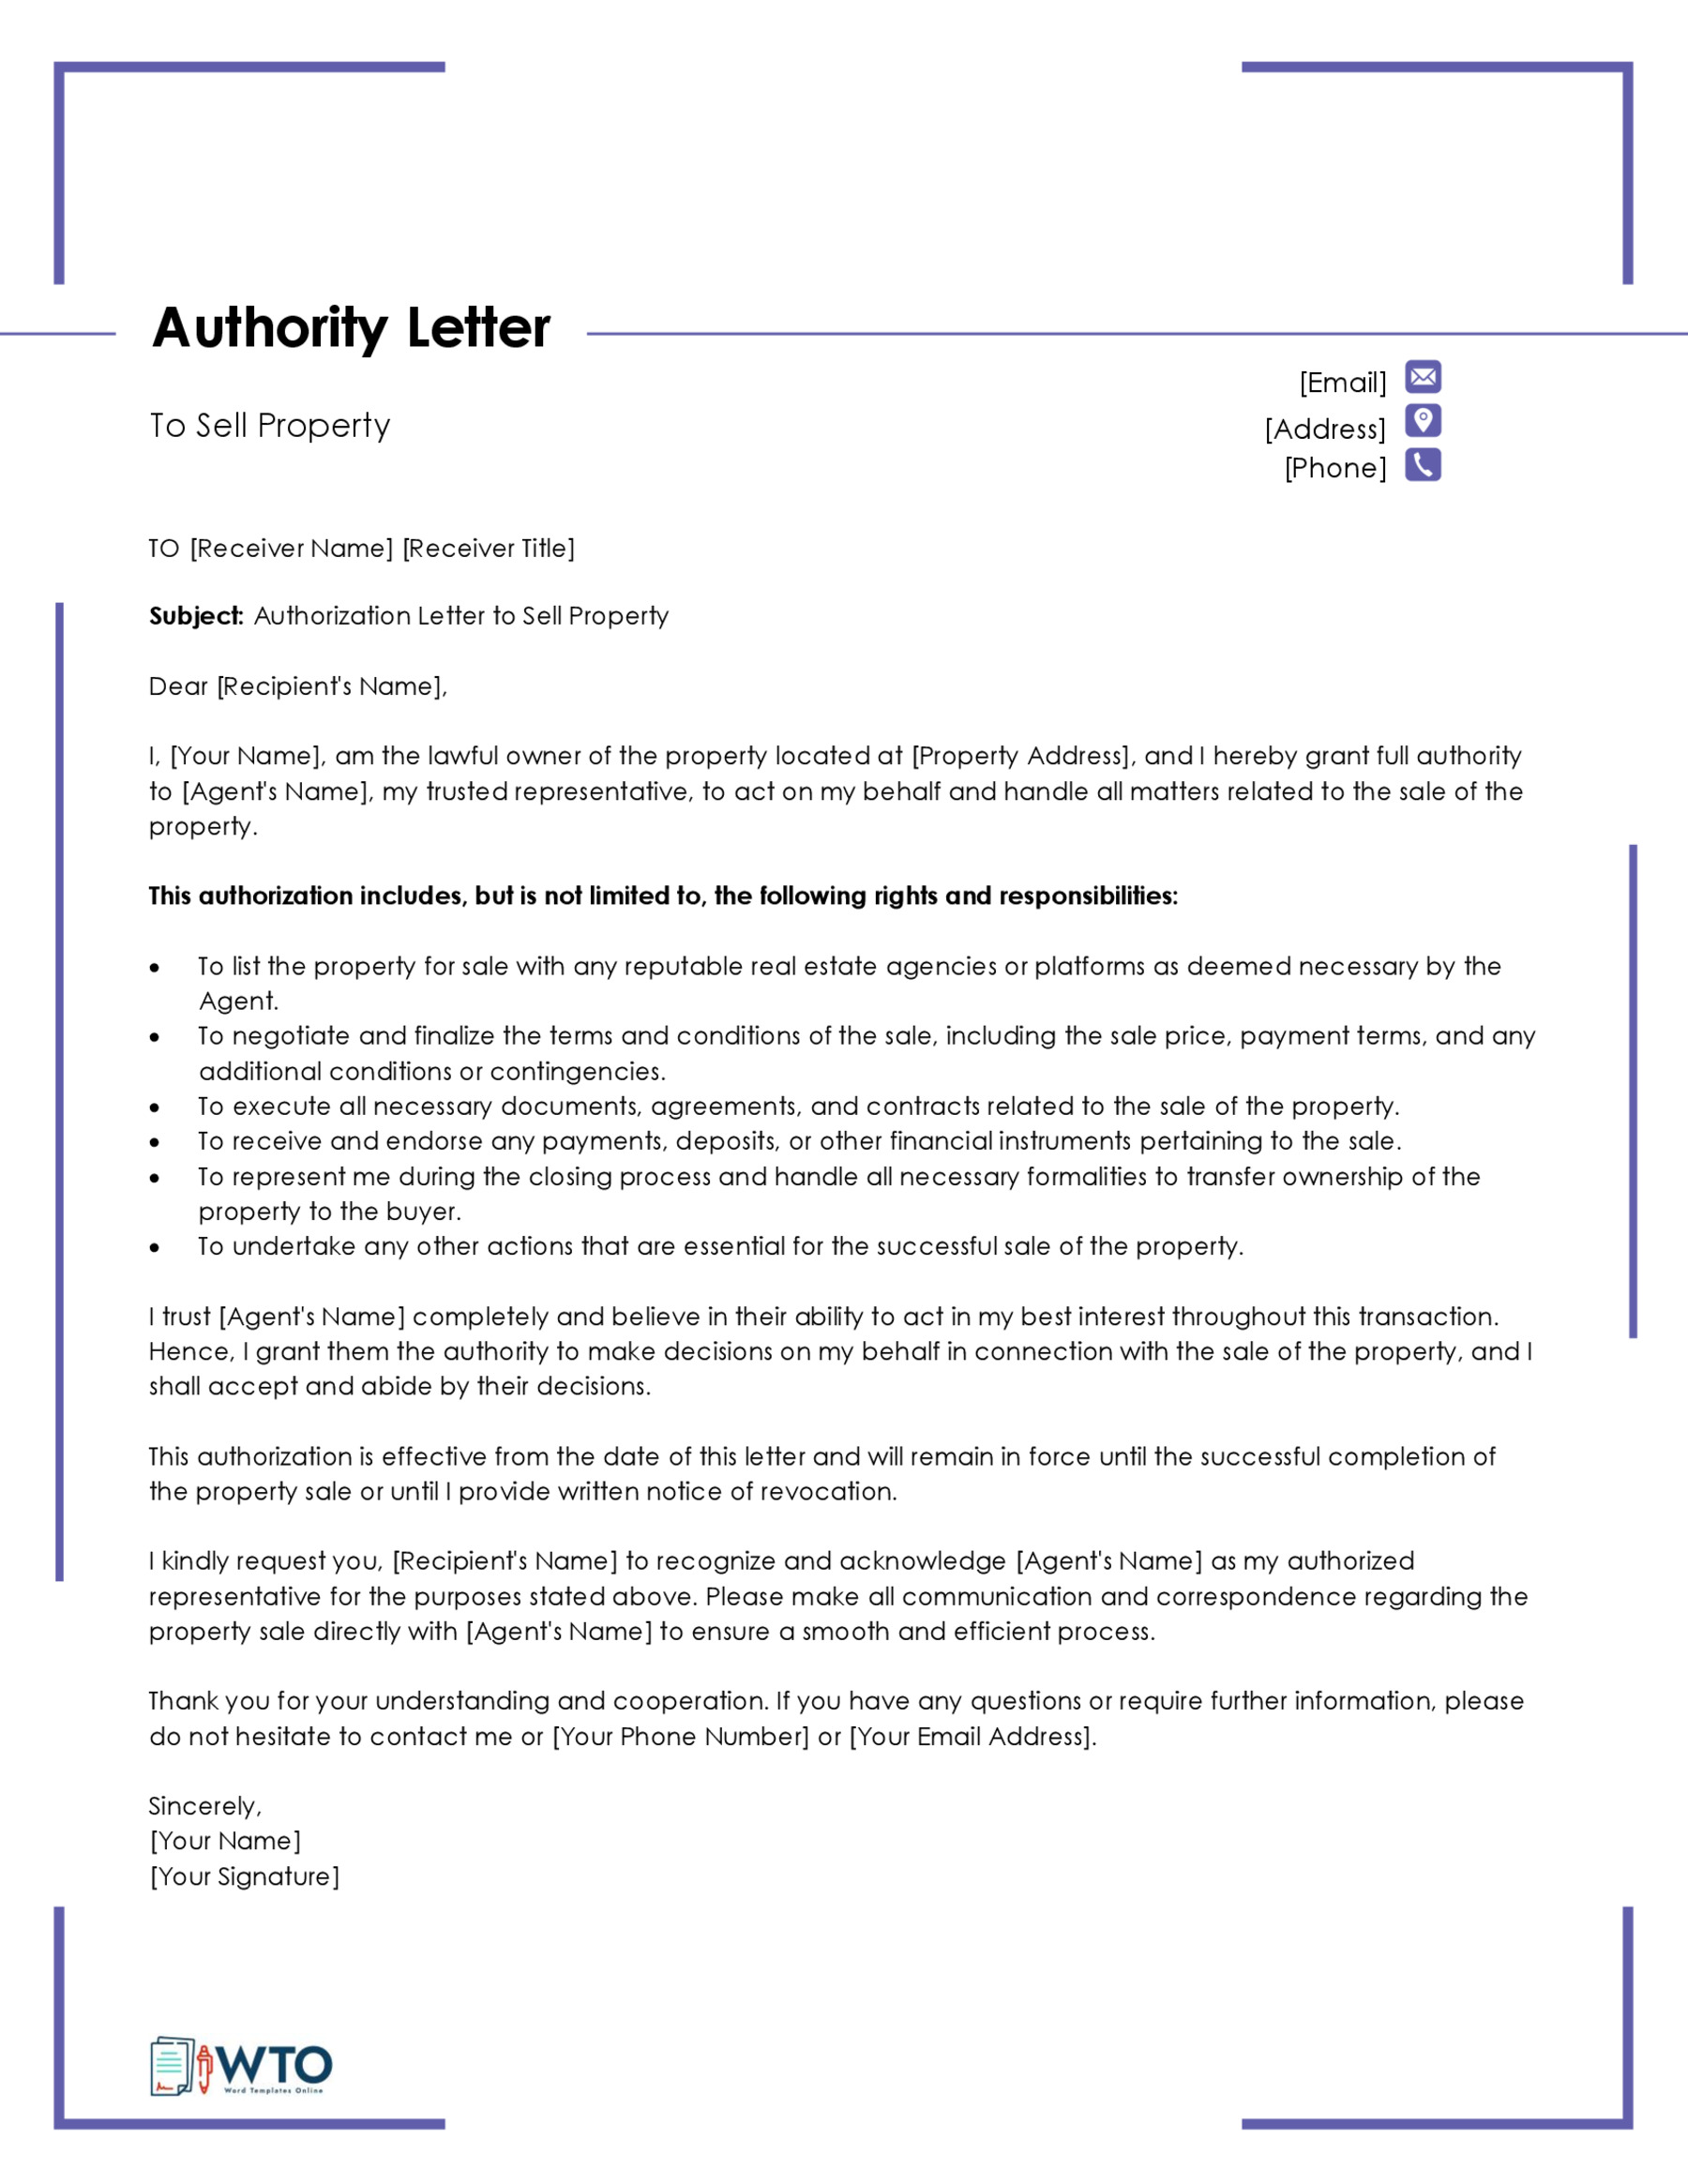 Authorization Letter to Sell Property Template-Word Free Download